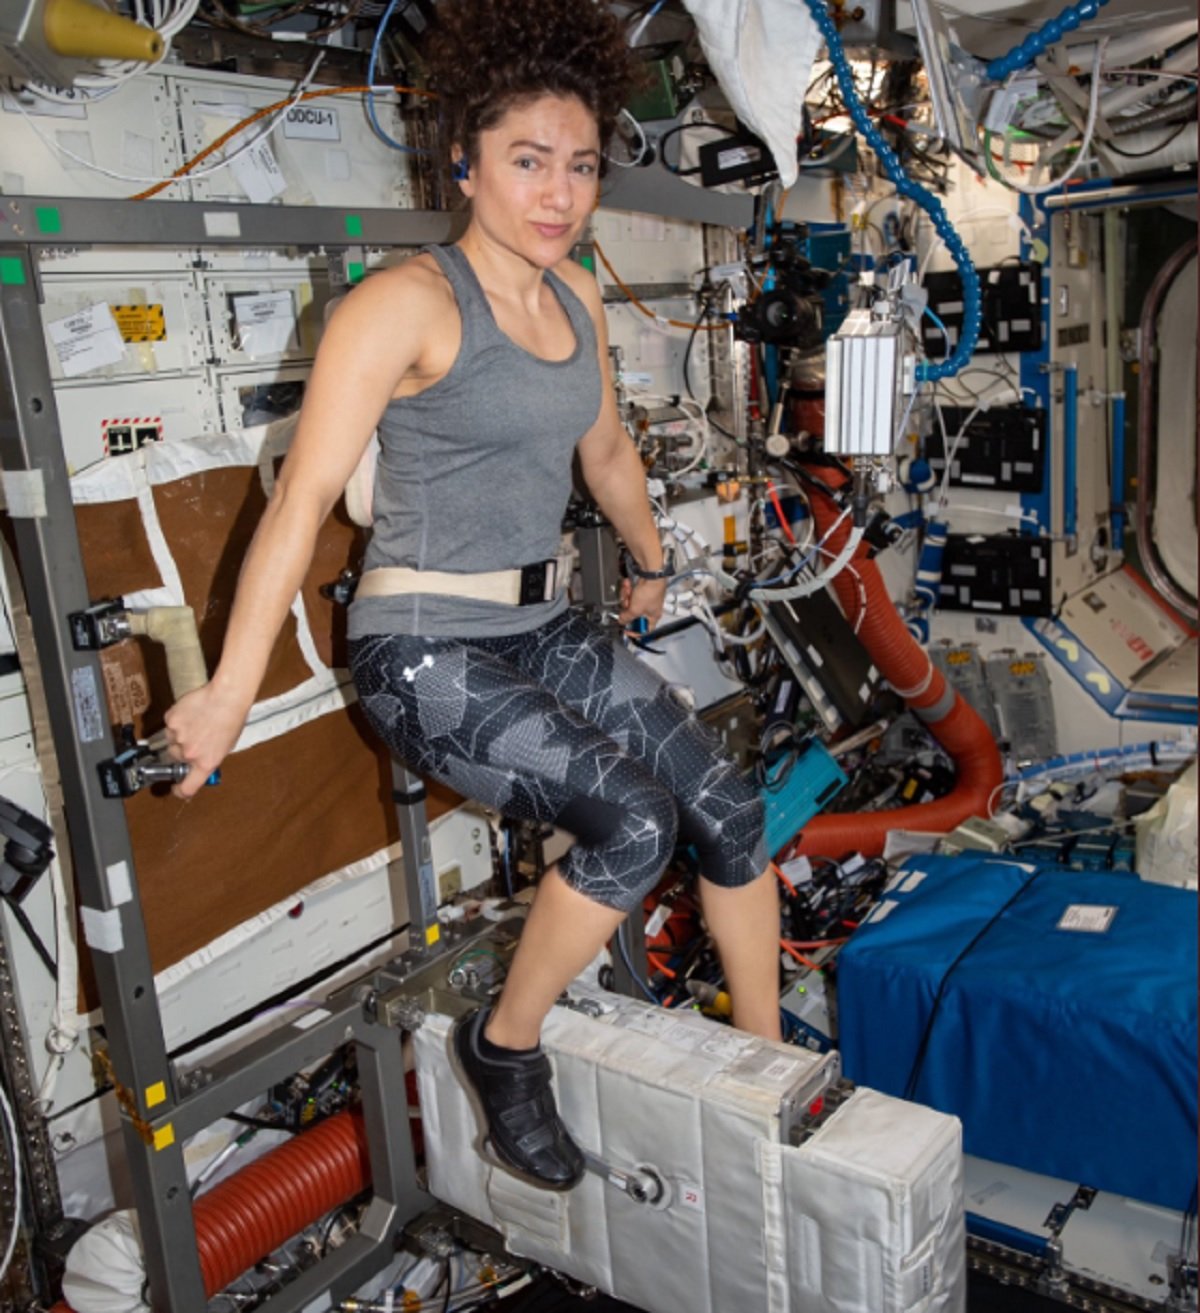 Image shows astronaut Jessica Meir working out on the International Space Station.— Twitter/@Astro_jessica